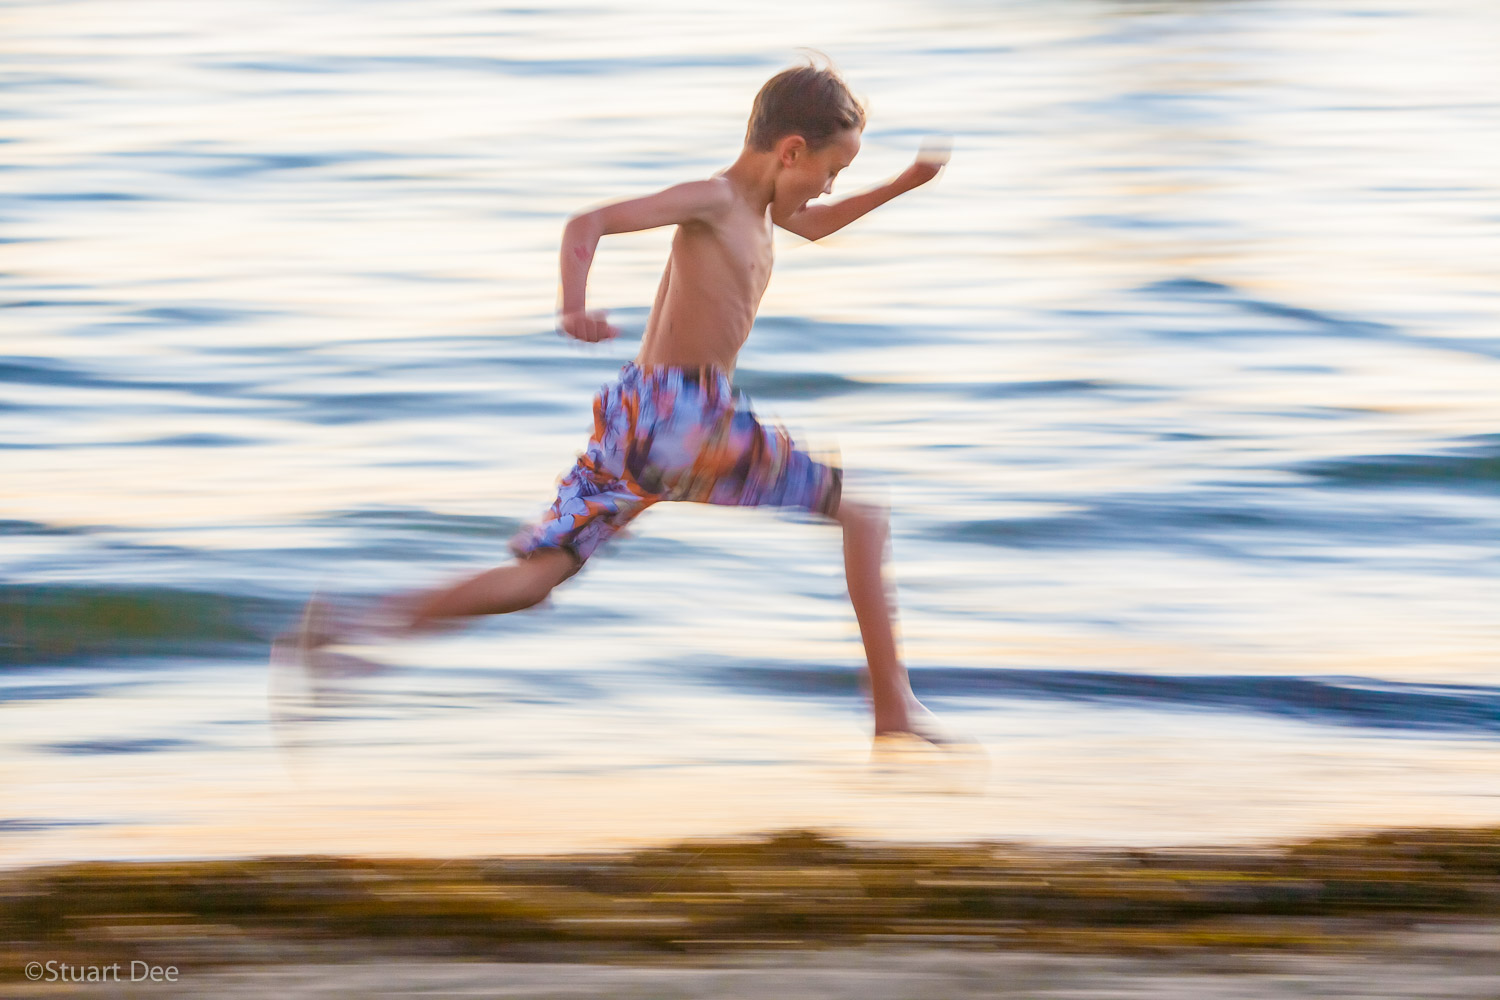  Young boy running along the beach at sunset,  Vancouver, BC, Canada 